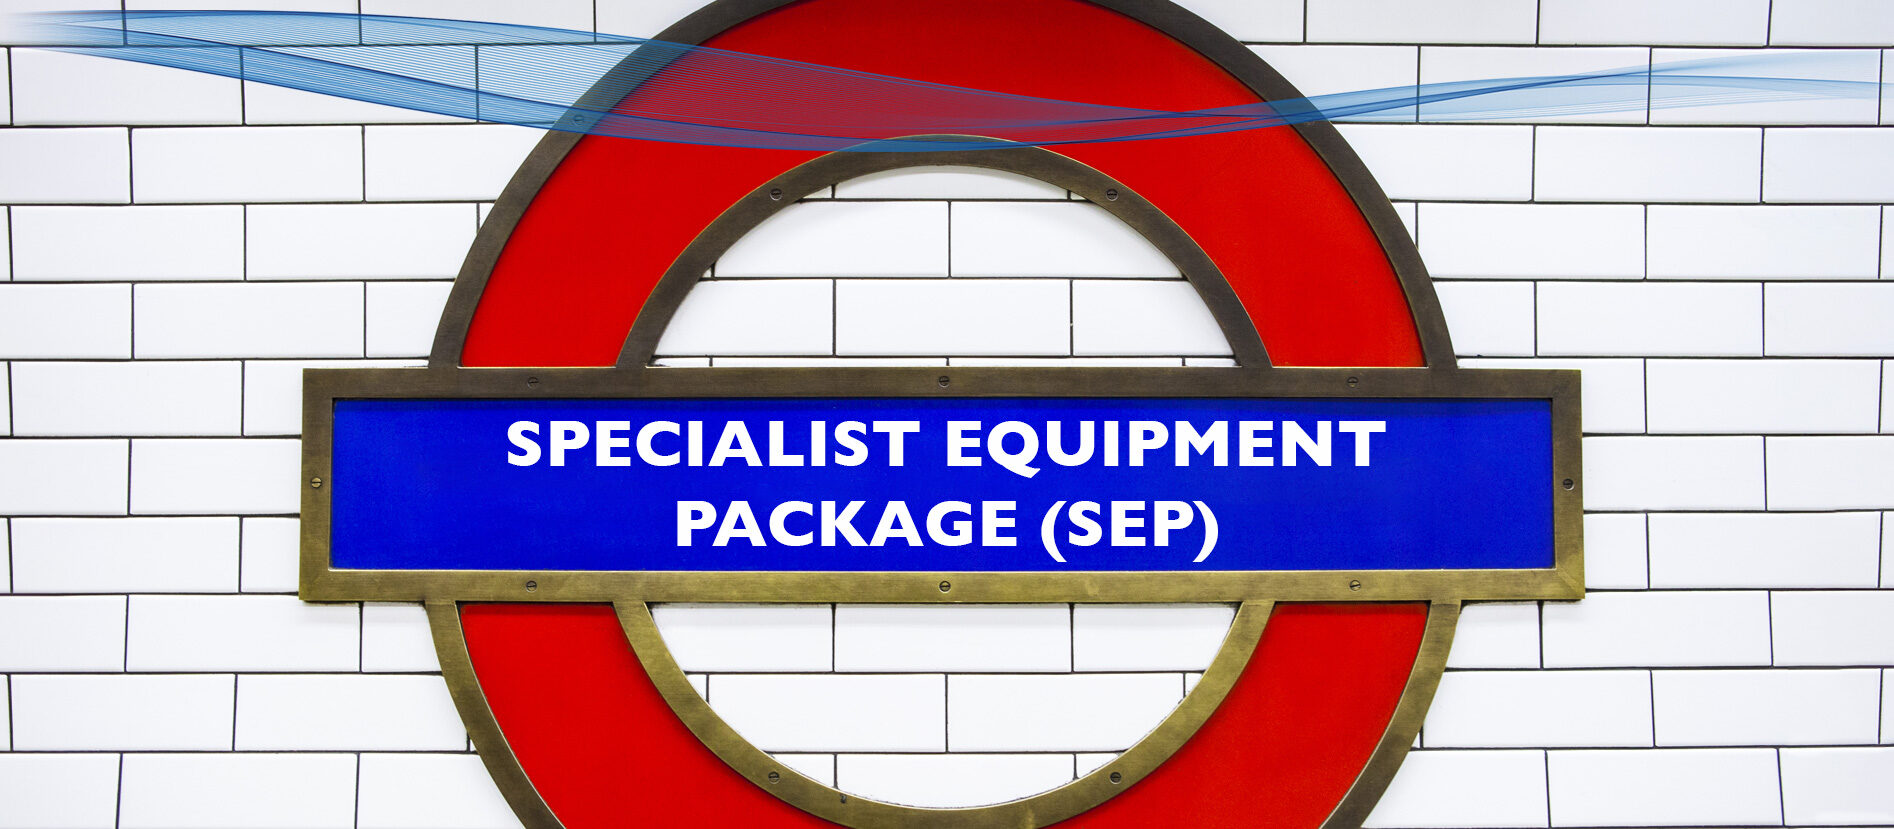 SPECIALIST EQUIPMENT PACKAGE (SEP)